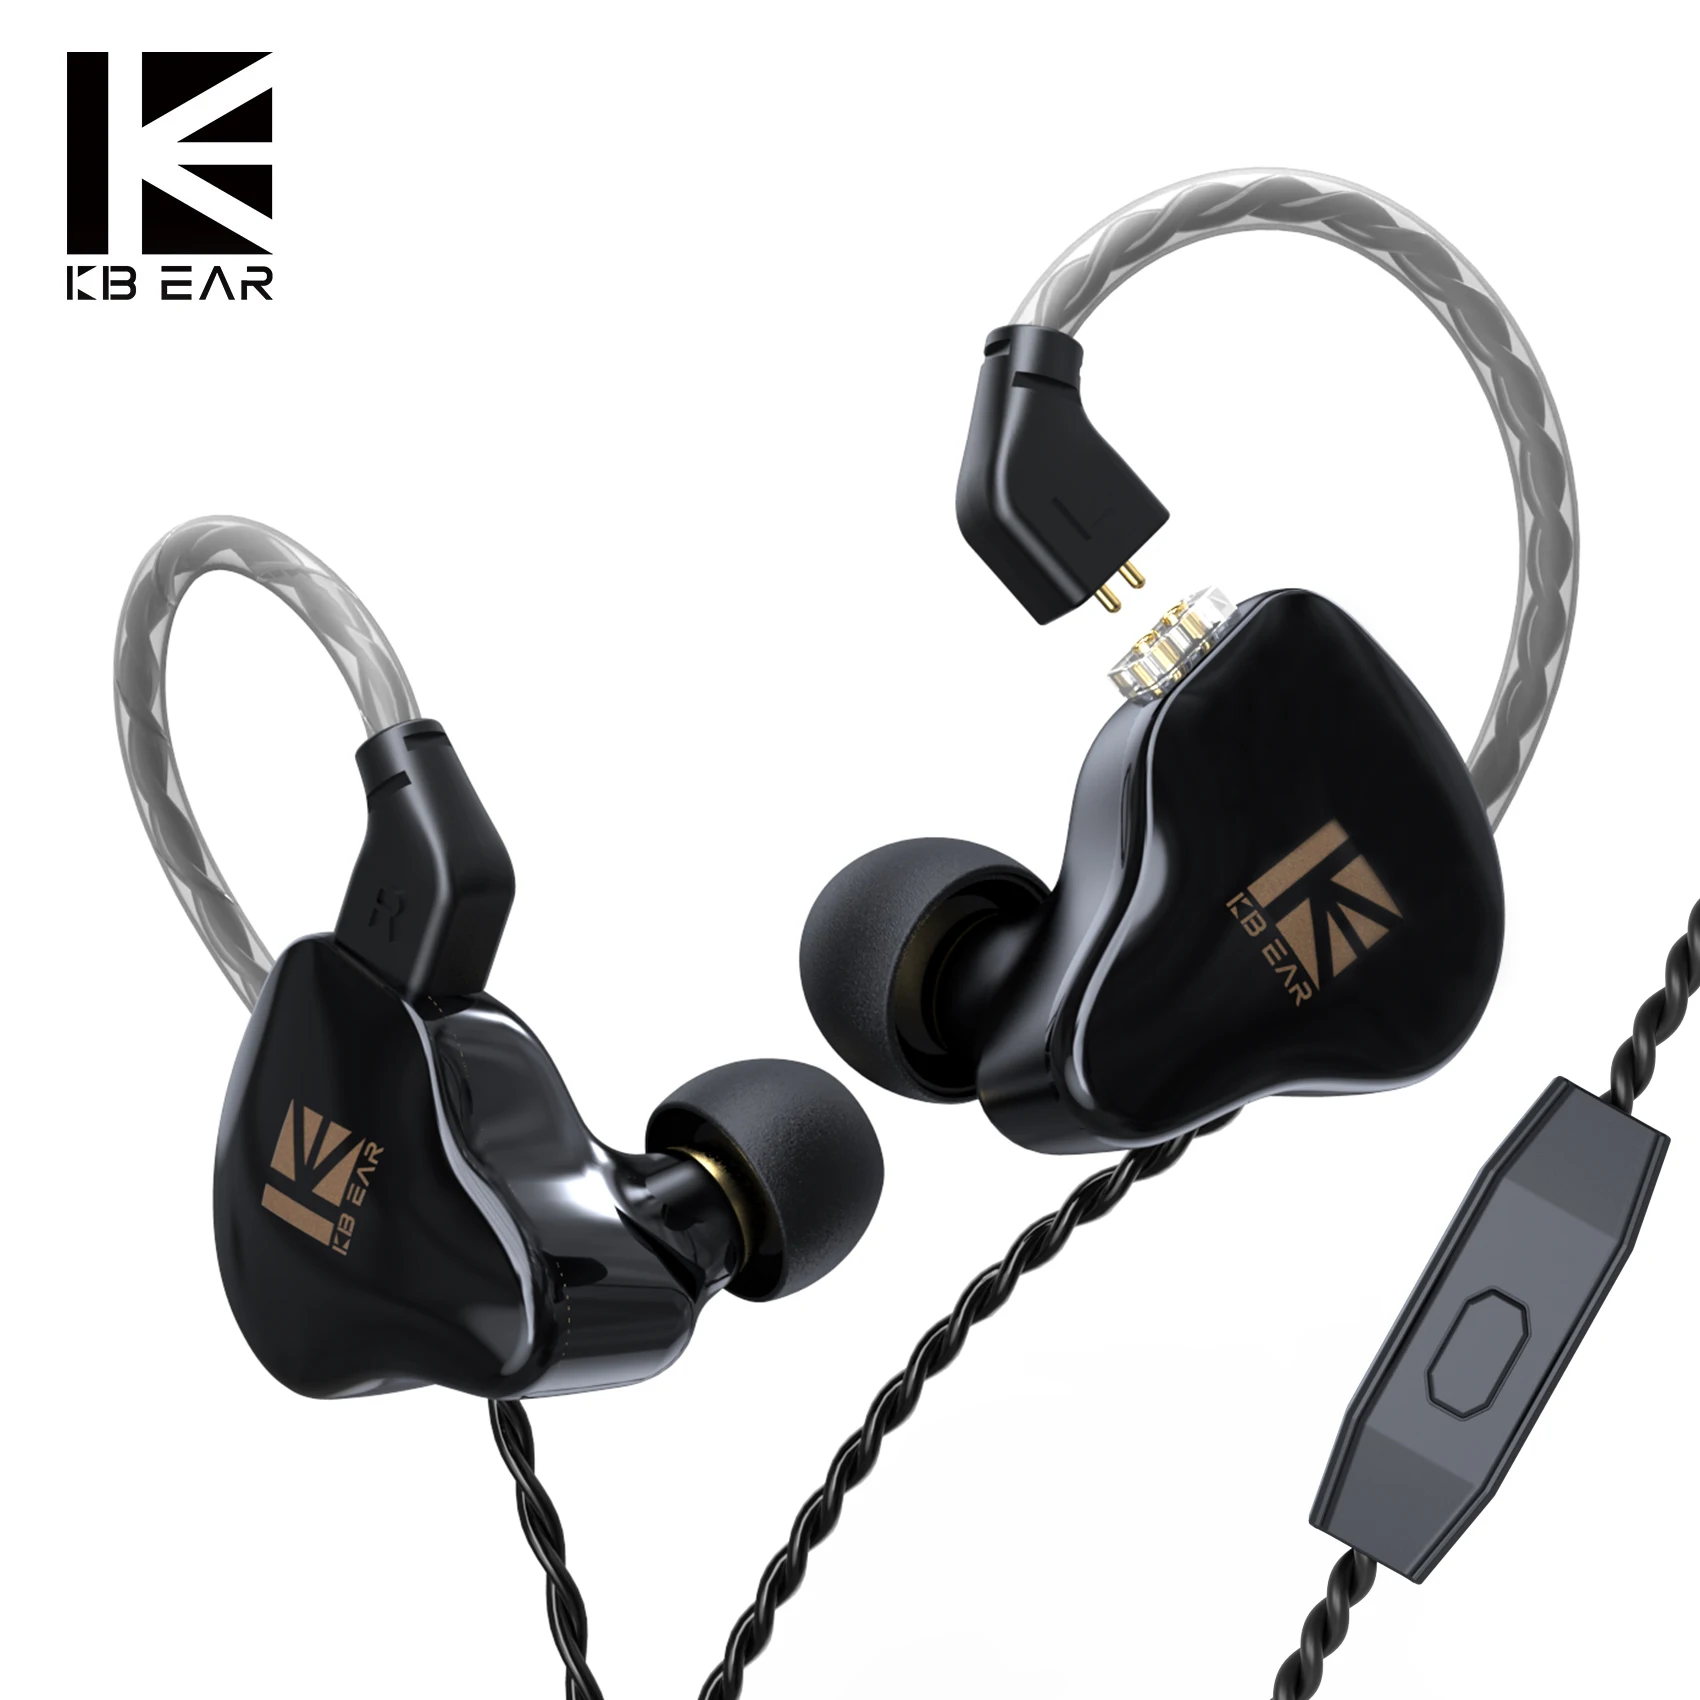 

KBEAR KS1 HIFI In Ear Earphones Dual Magnectic Circuit Dynamic Wired Noise Canceling Monitors Headset with Detachable Cable Mic